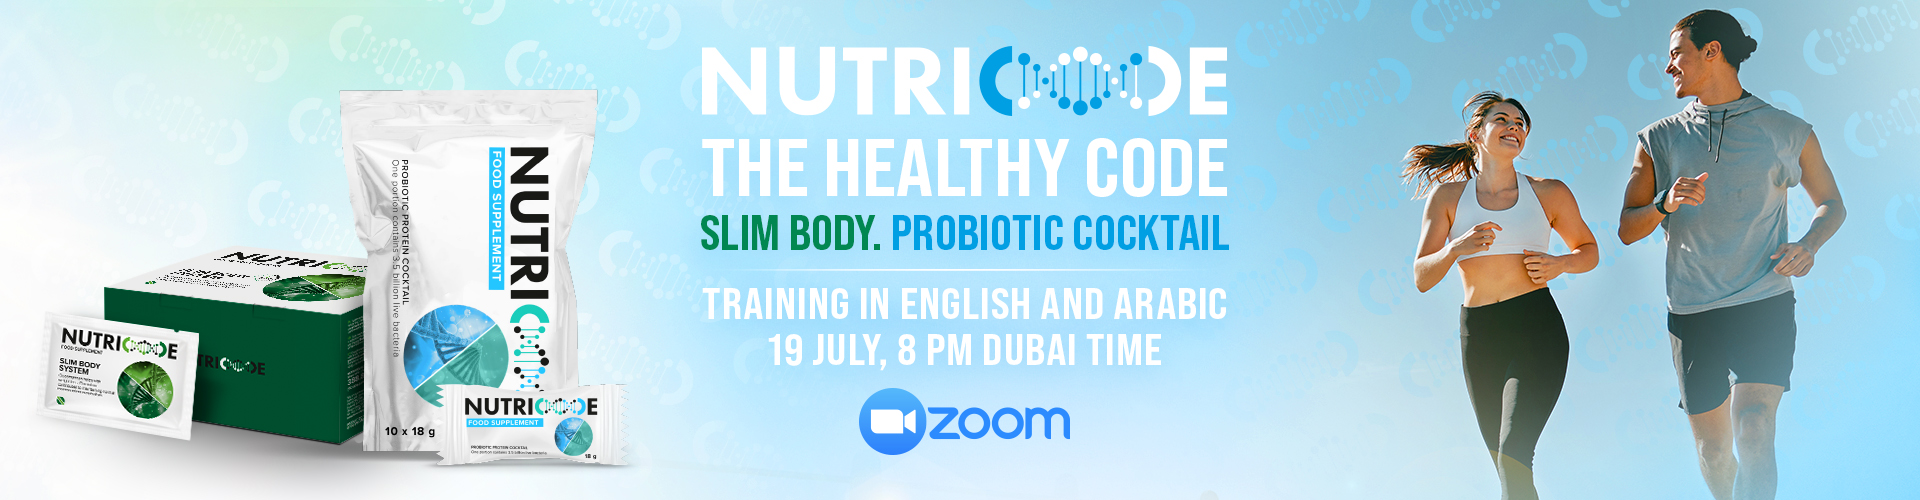 NUTRICODE: THE HEALTHY CODE